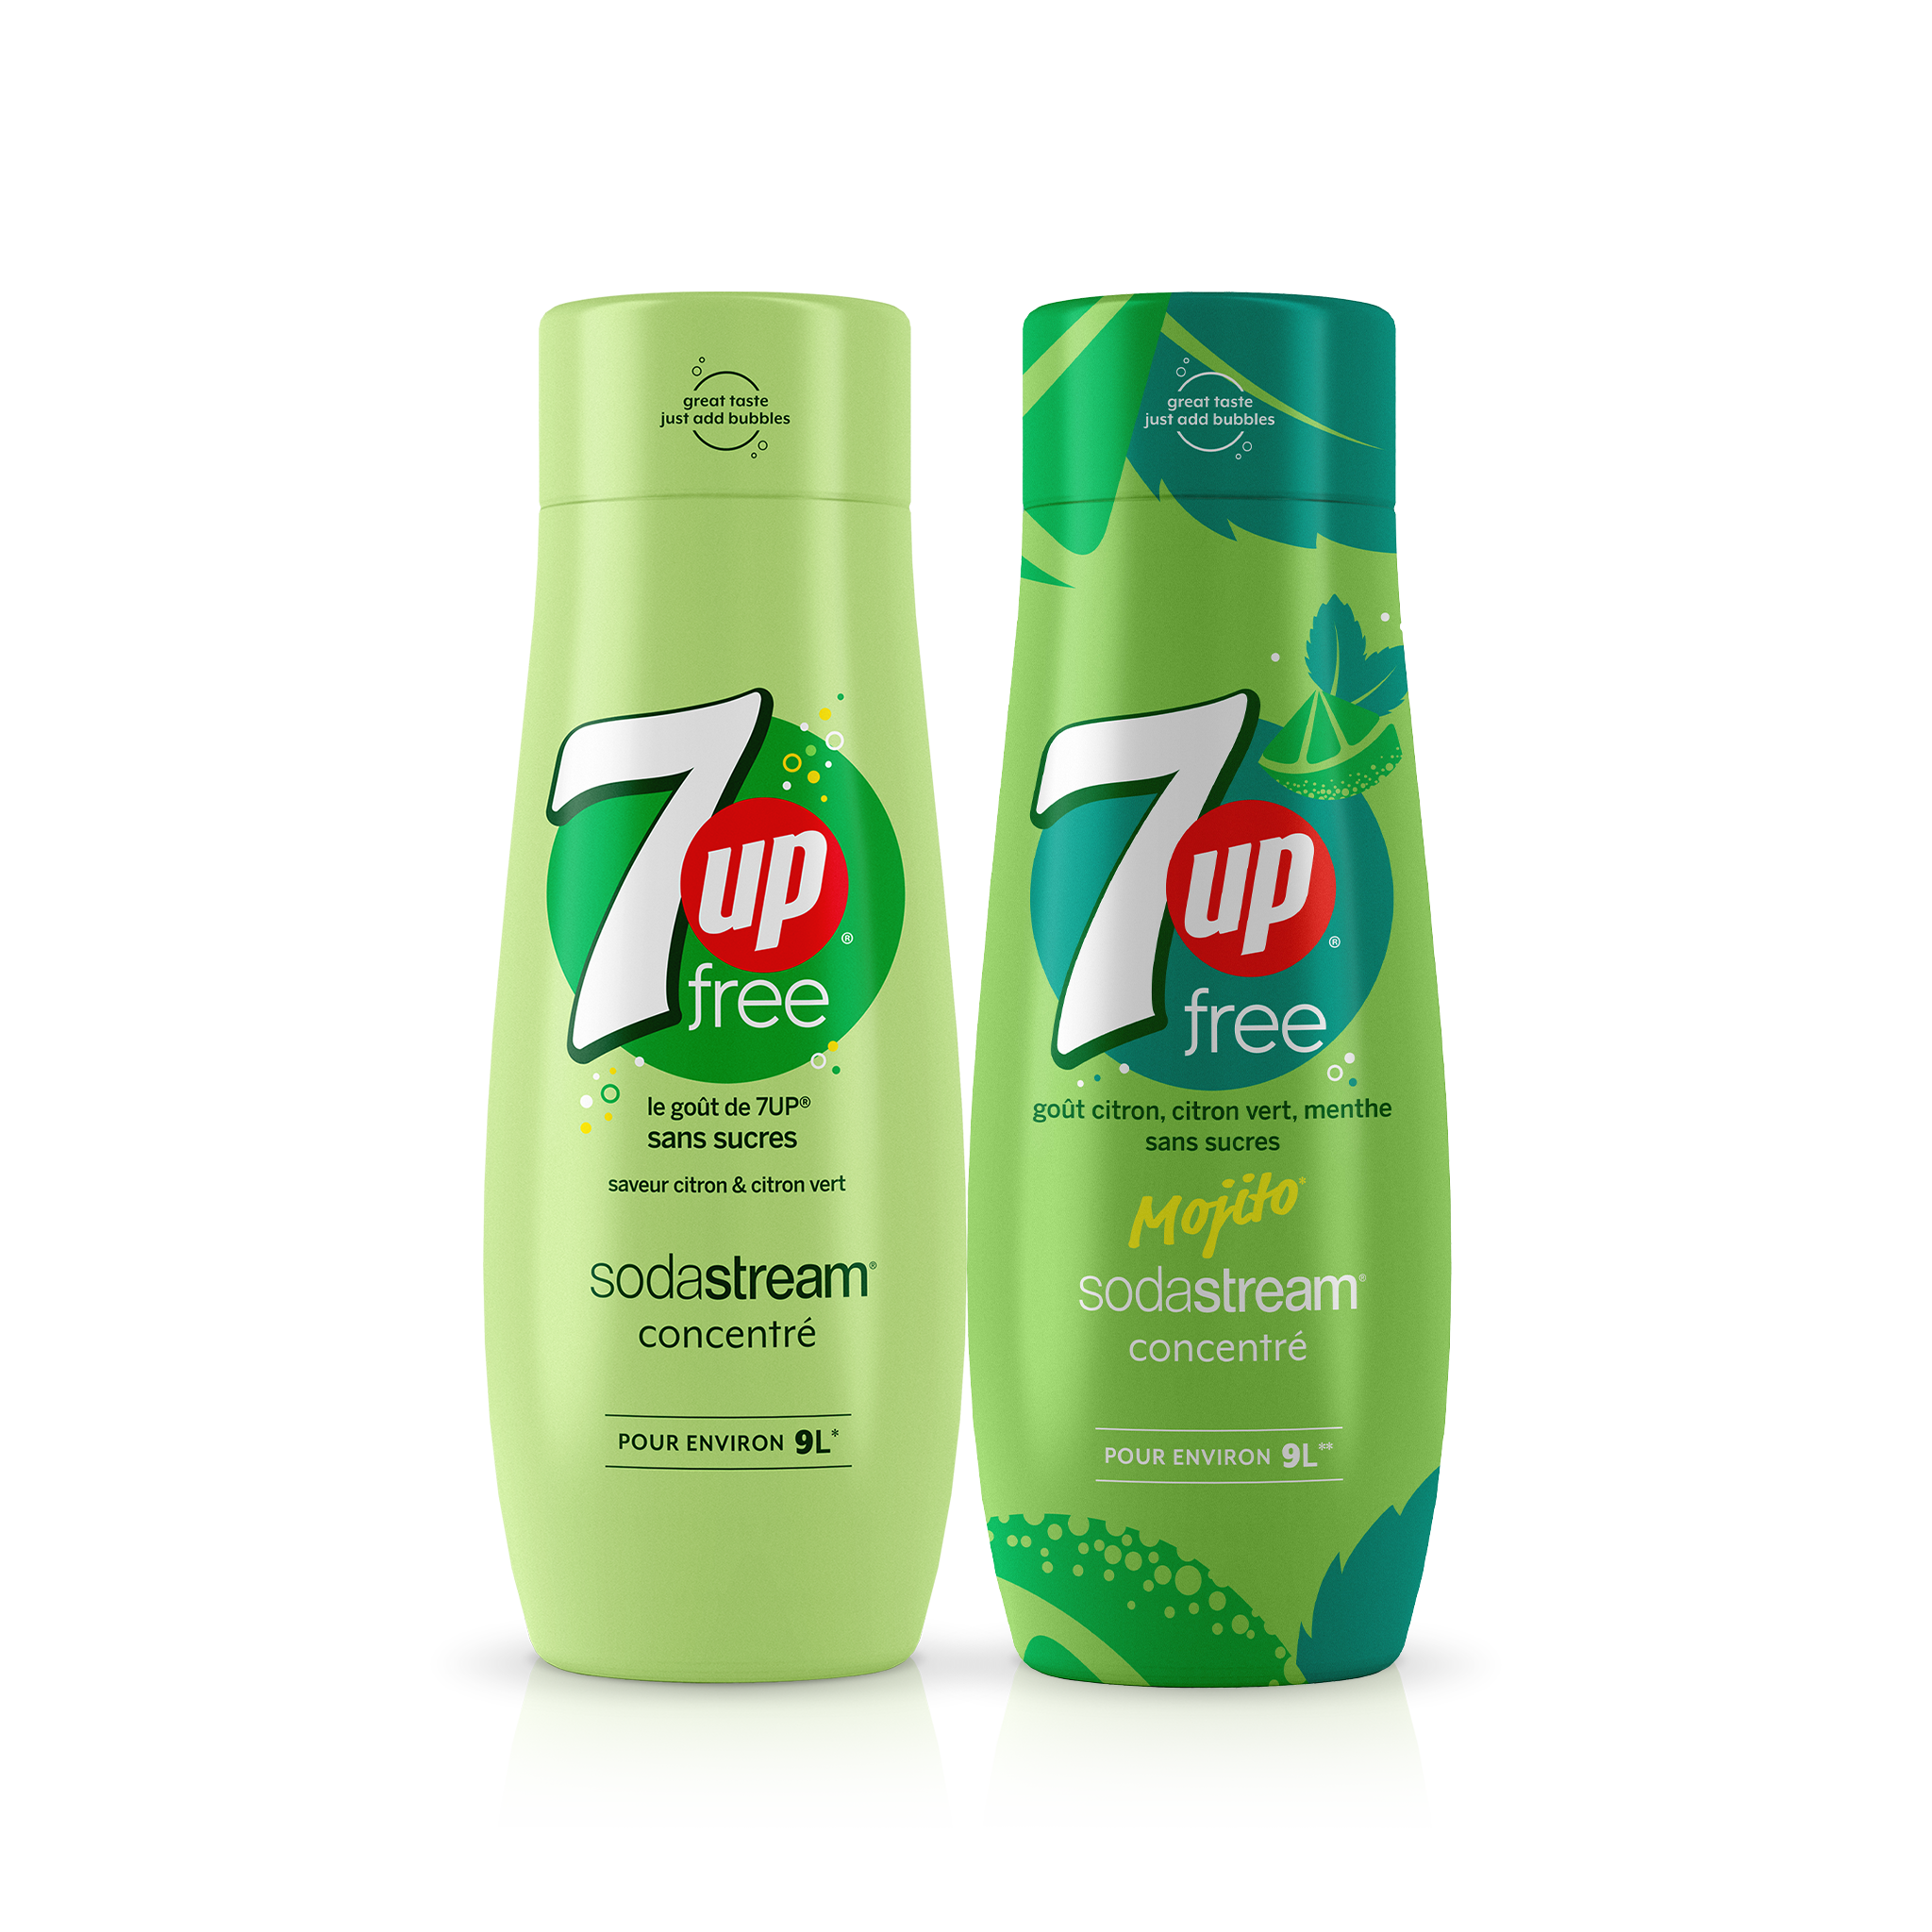 DUO 7up FREE